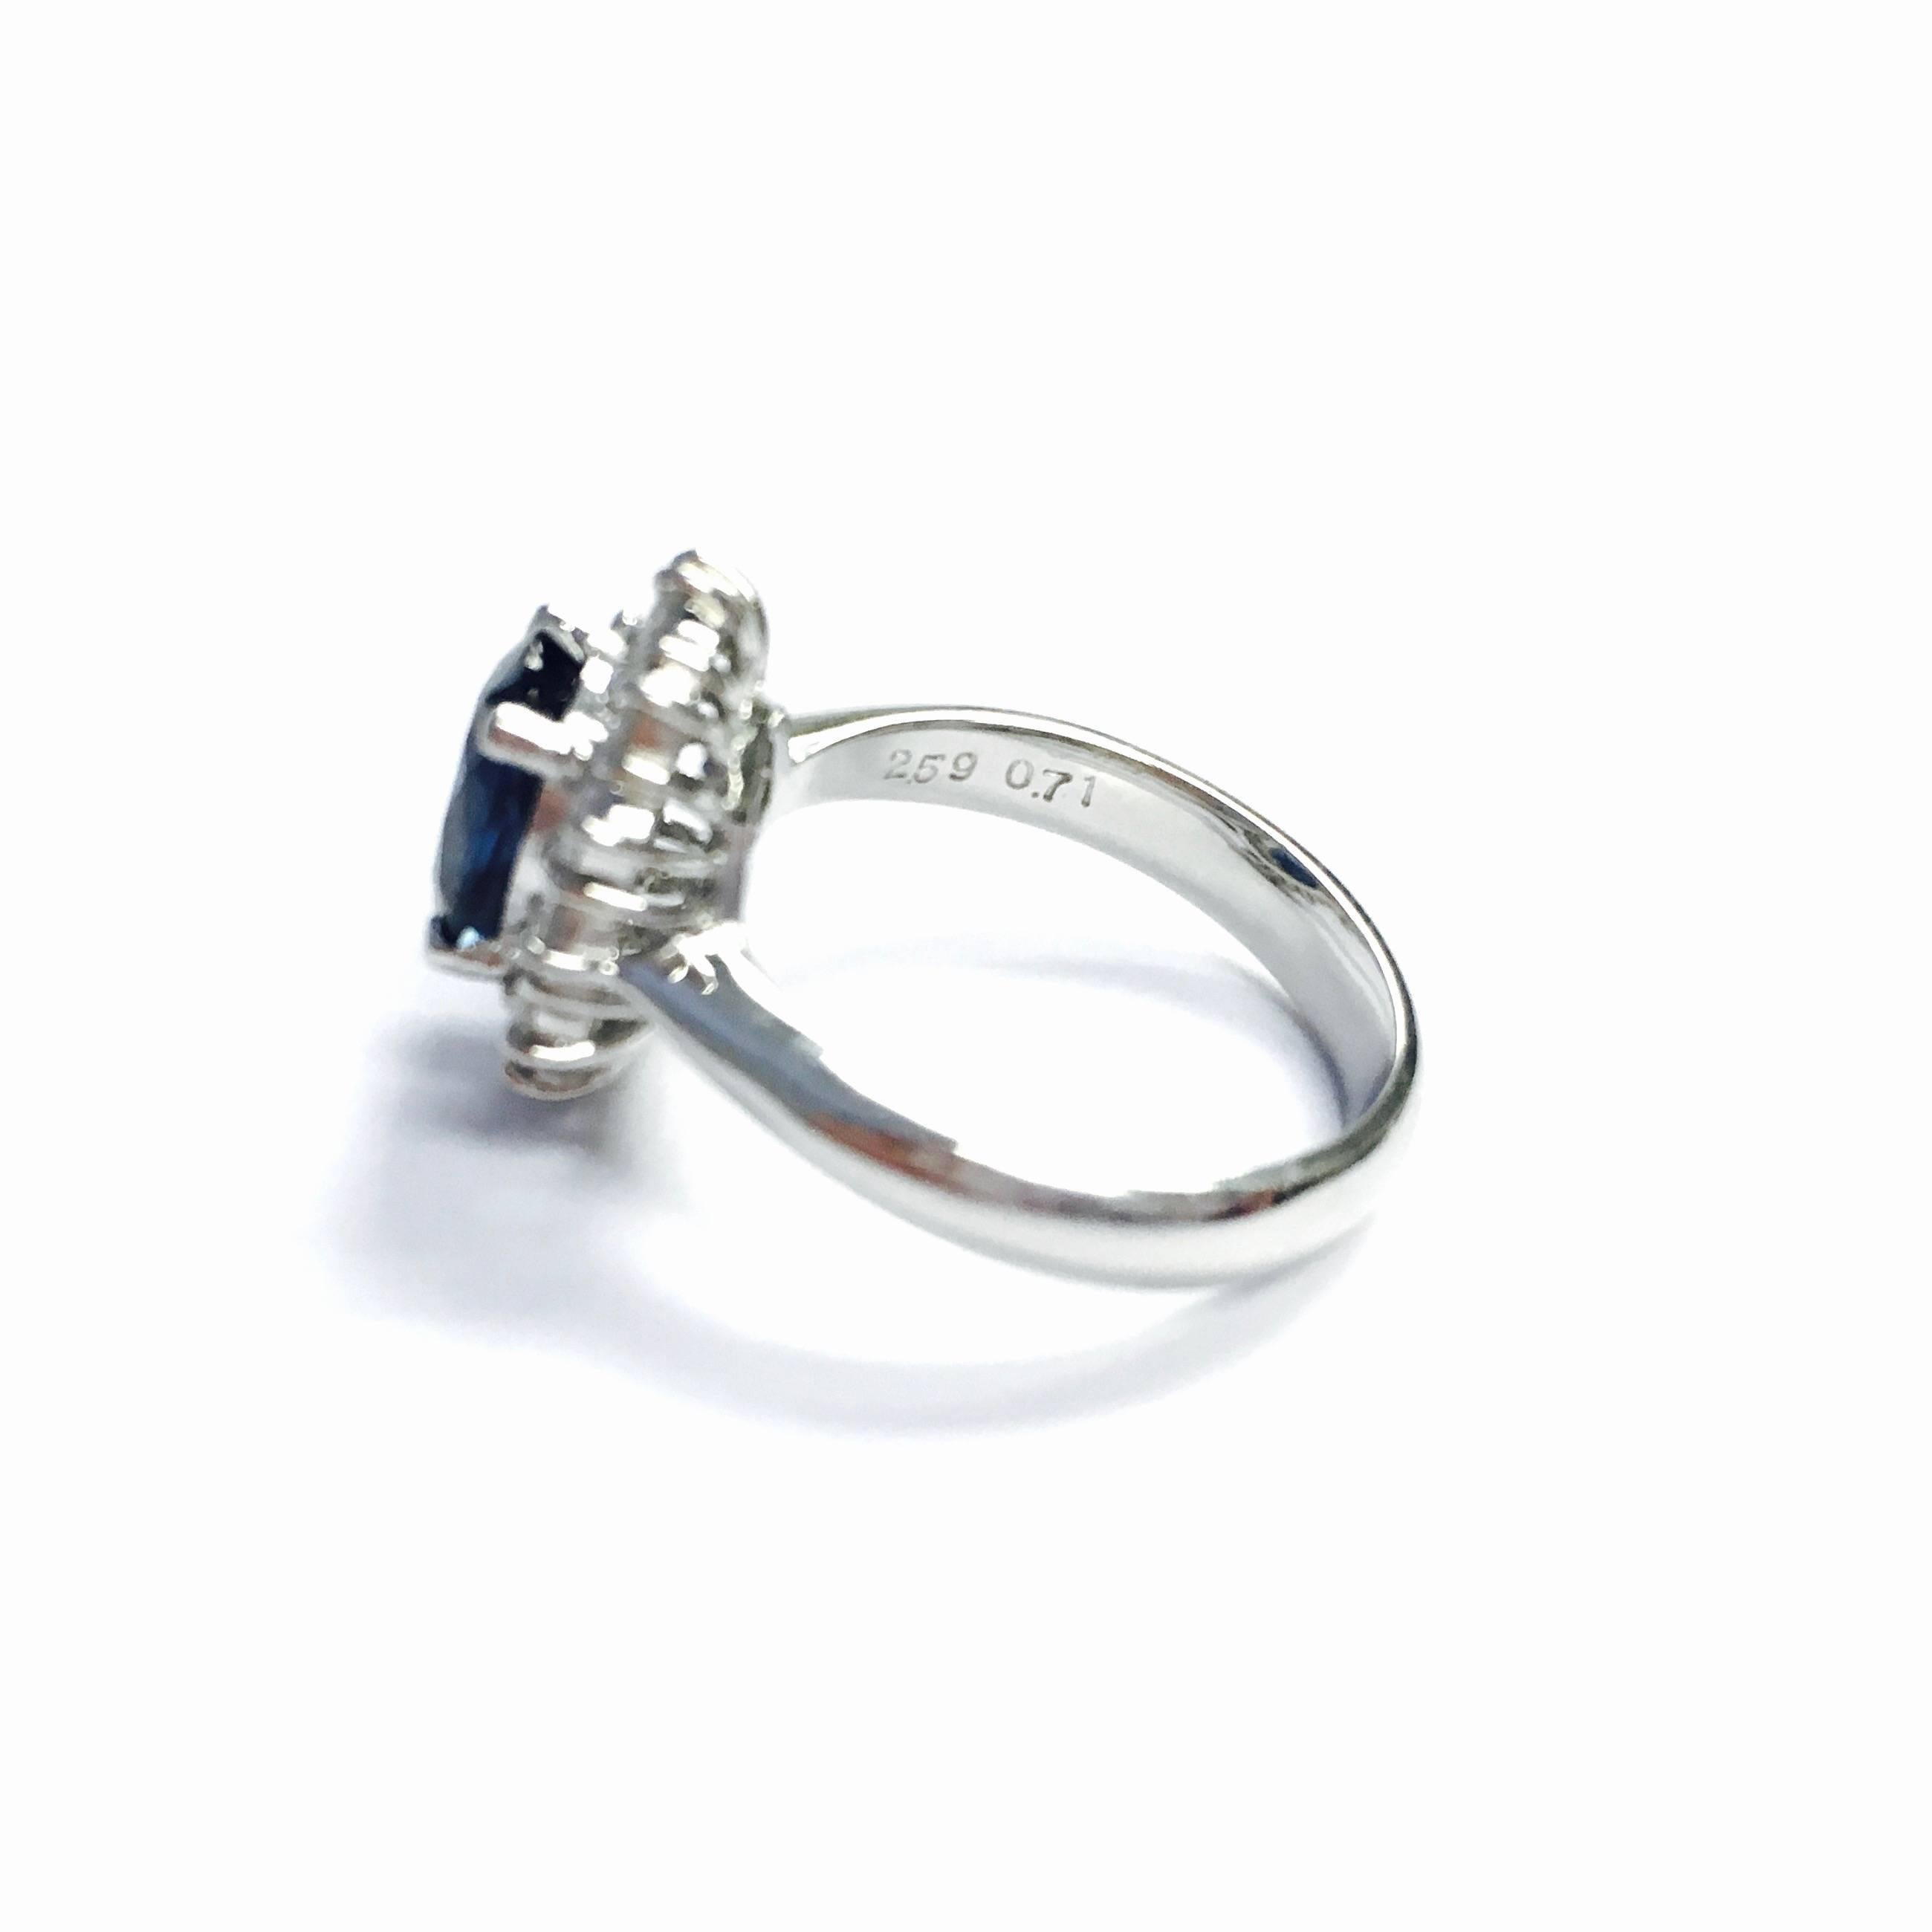 Classic style platinum ring, featuring an oval natural blue sapphire, surrounded by 12 round brilliant cut diamonds, supported by a 3.5 mm wide band. 
Sapphire: 2.59ct. No Heat. GIA Report# 2181662162
Diamond: 0.71ctw., Color: F-G, Clarity: